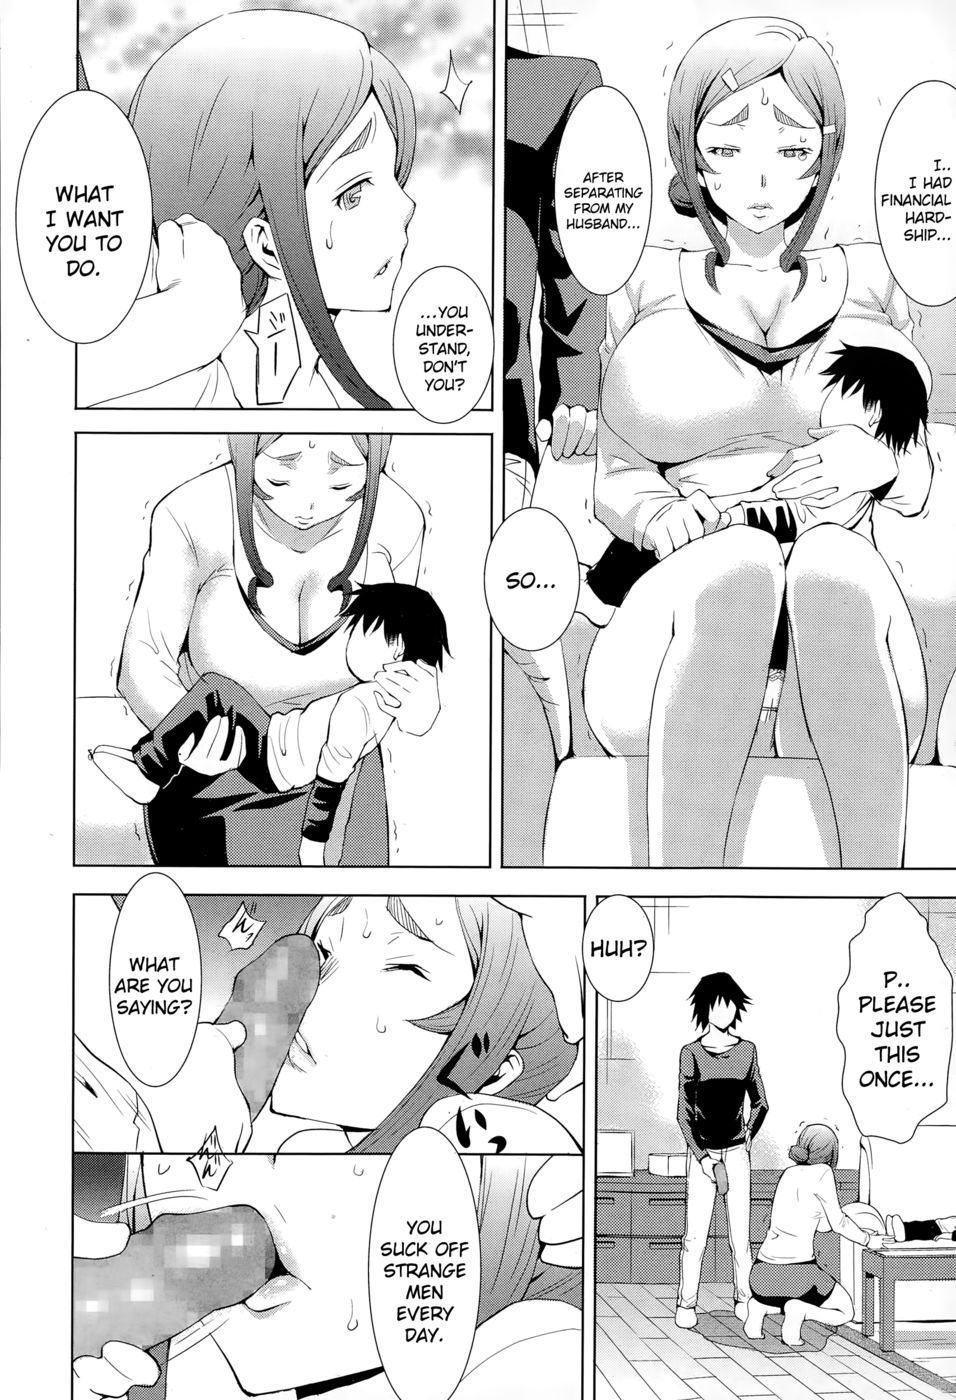 The Secret of a Quiet Housewife 1 Naughty Hentai Manga Woman image